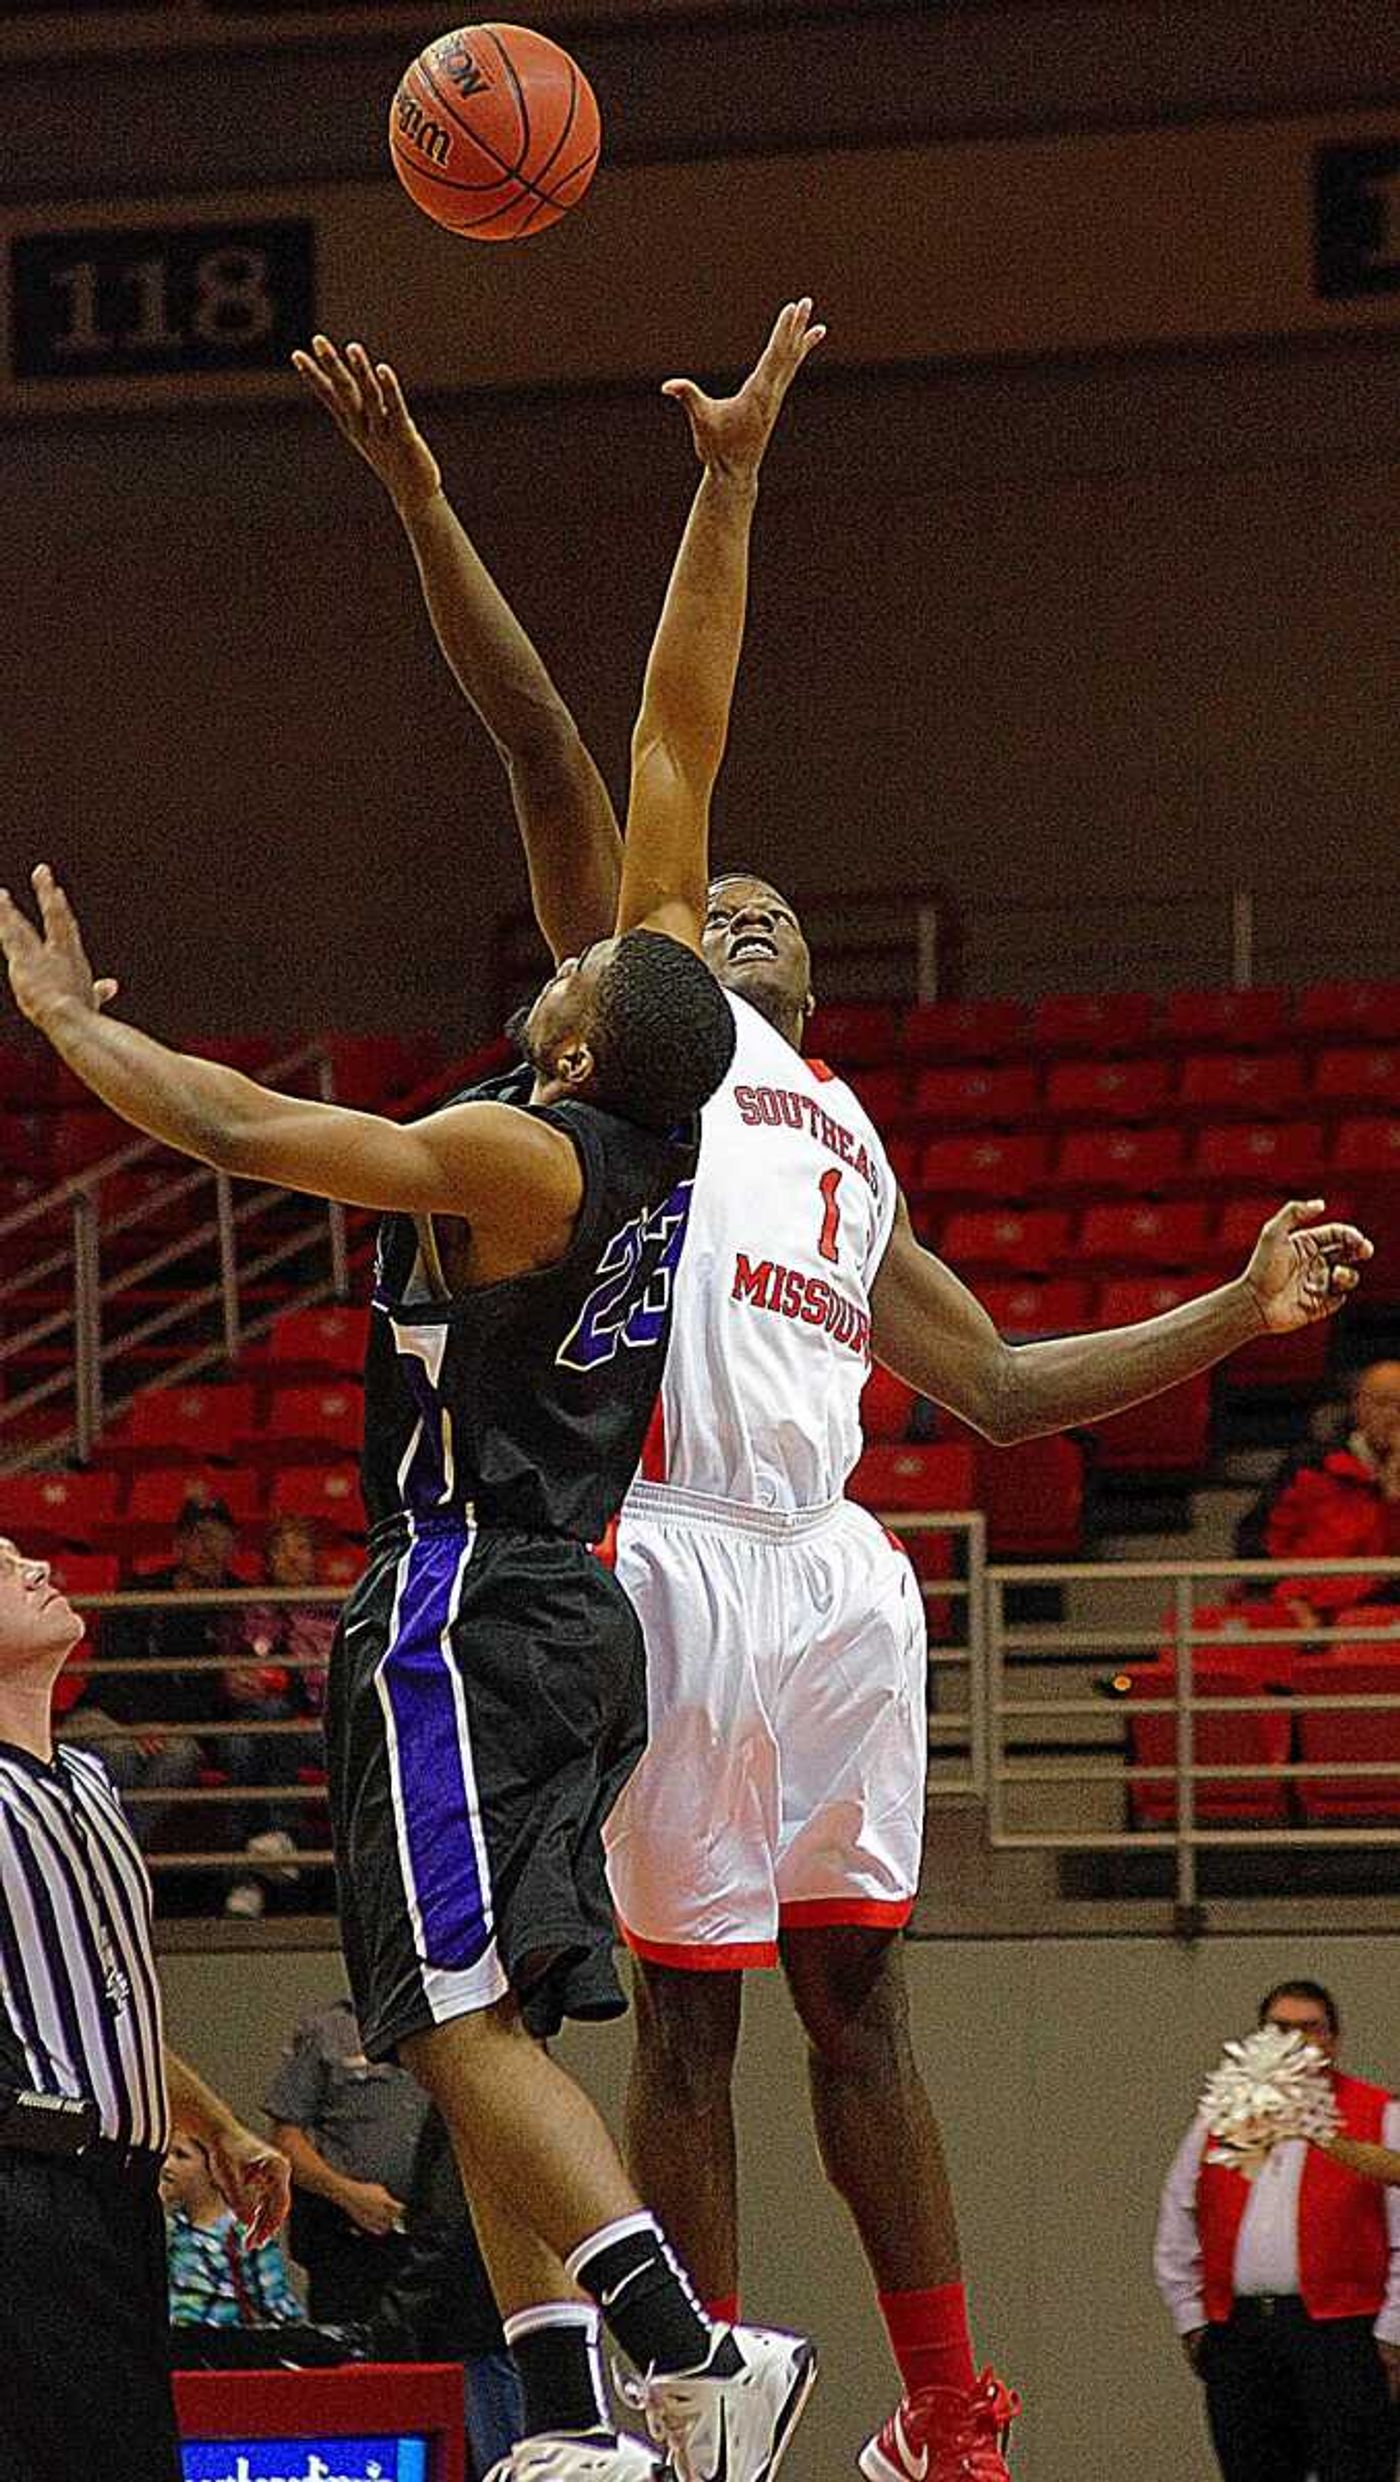 Southeast forward Nino Johnson competes for the jump ball at the start of the game against Ouachita Baptist on Oct. 30 at the Show Me Center. Photo by Nathan Hamilton.